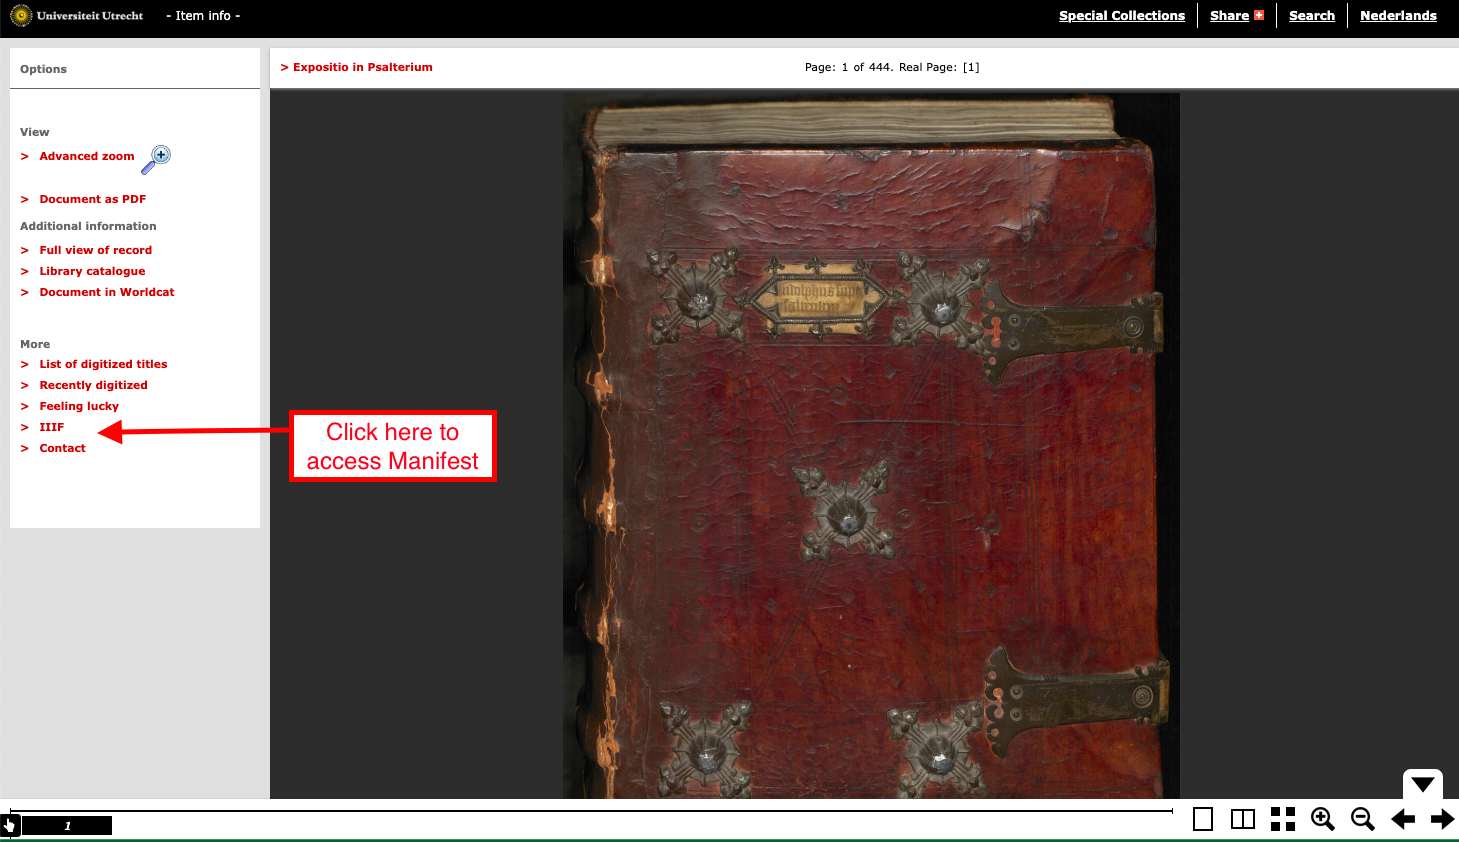 Click on a digitized object and subsequently on 'IIIF' in the left menu